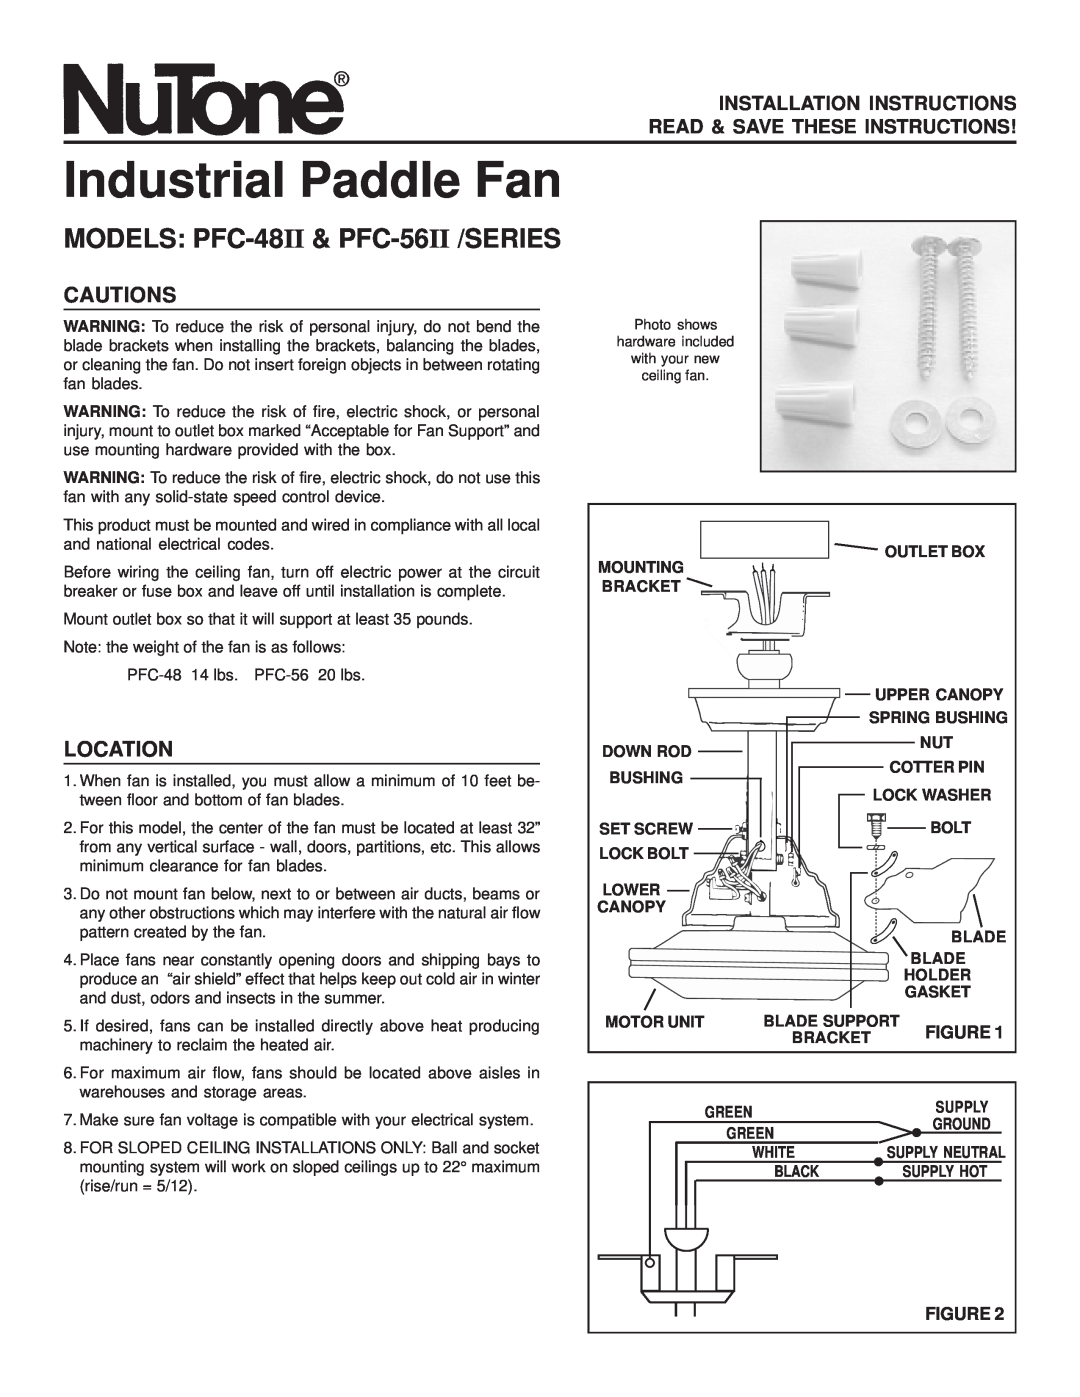 NuTone installation instructions Cautions, Location, Industrial Paddle Fan, MODELS PFC-48II & PFC-56II /SERIES 